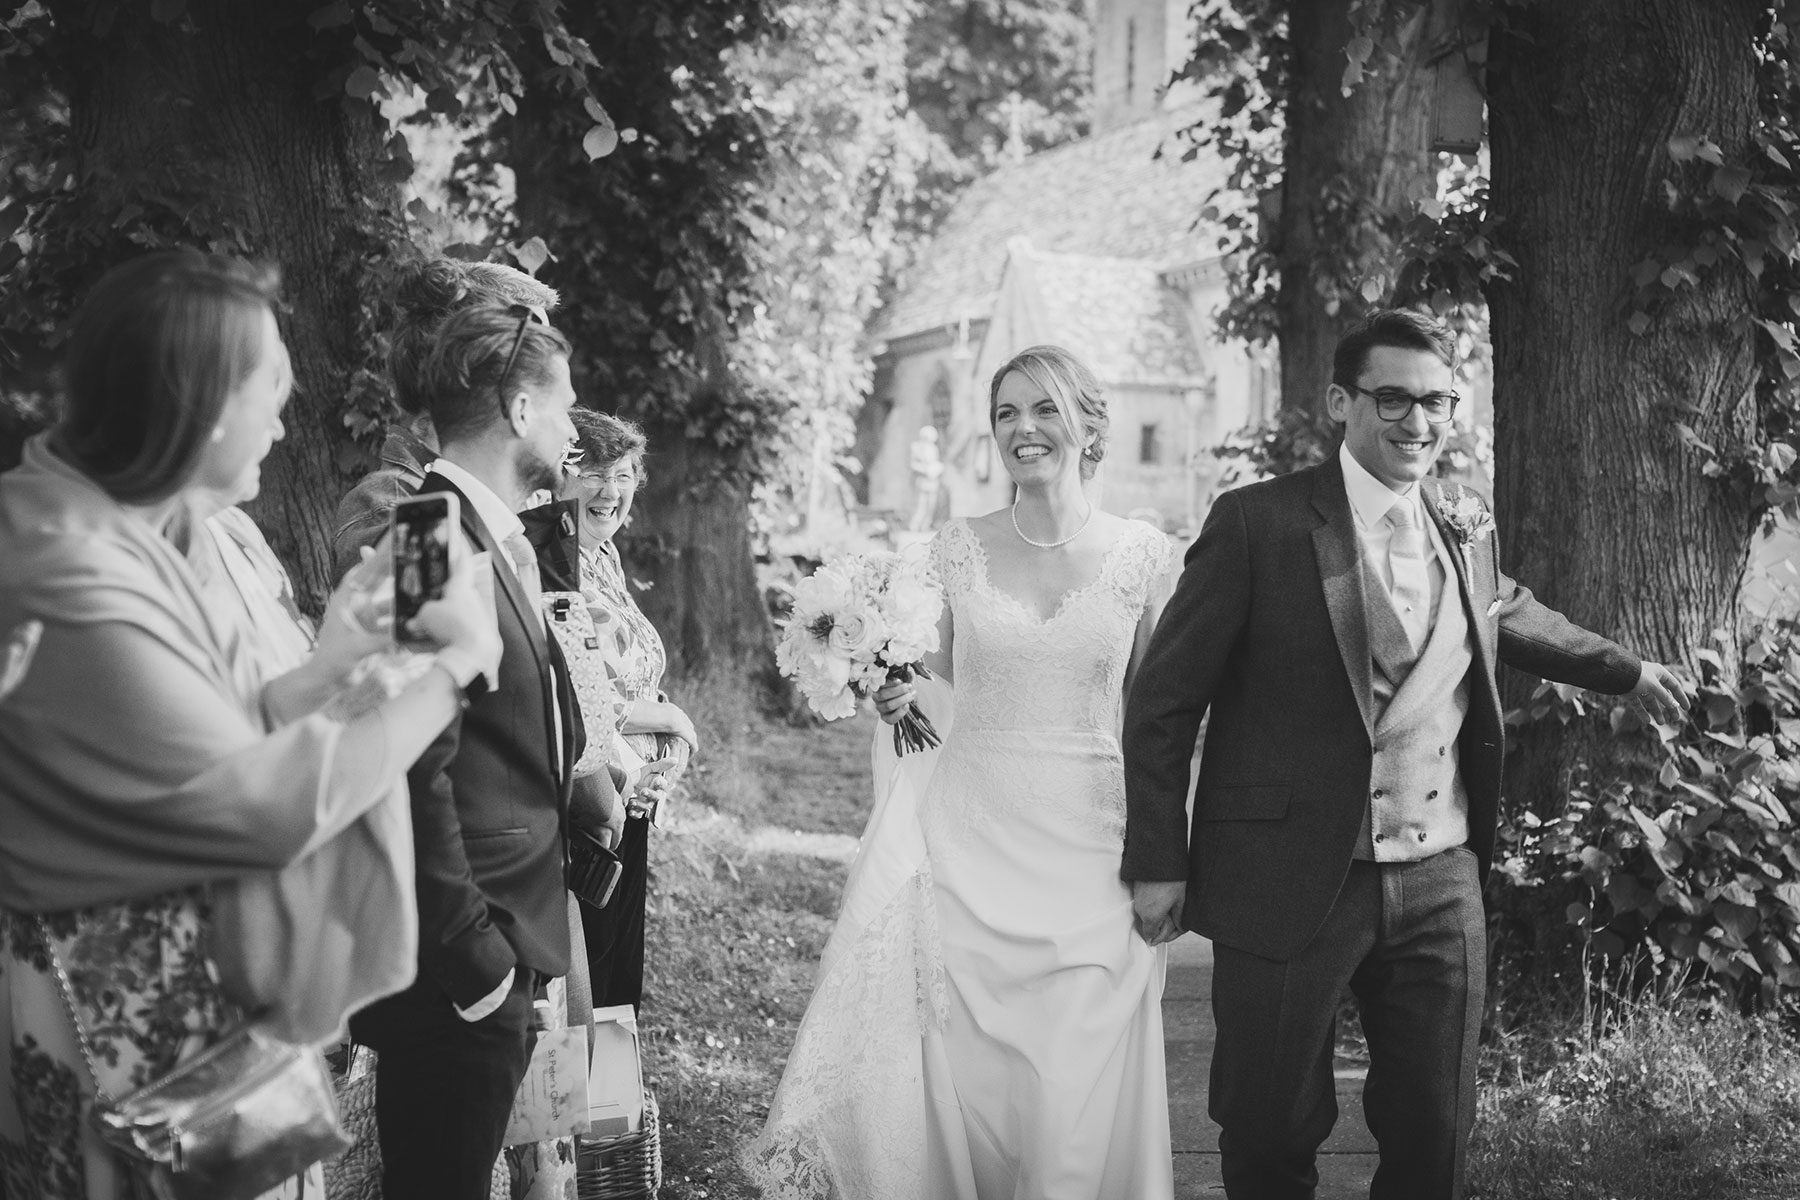 Leaving the church - Reportage Wedding Photography in Cheltenham, Gloucestershire & the Cotswolds | Bullit Photography.